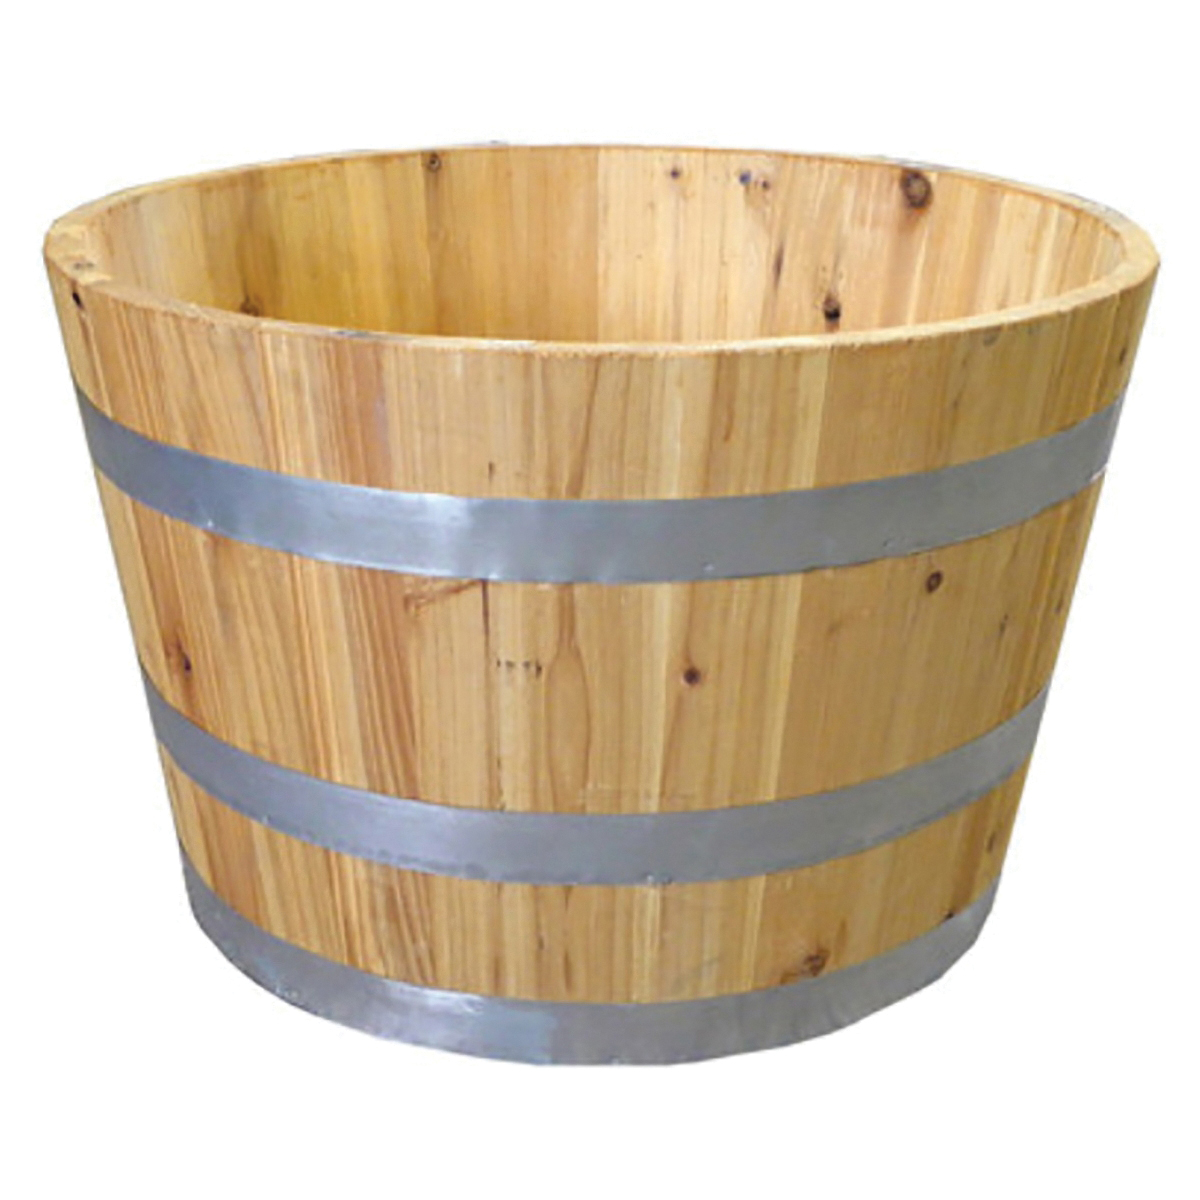 Real Wood Products G3054 Planter, Half Wine Barrel, Cedar, 25 in Dia, 16-1/2 in H - 1